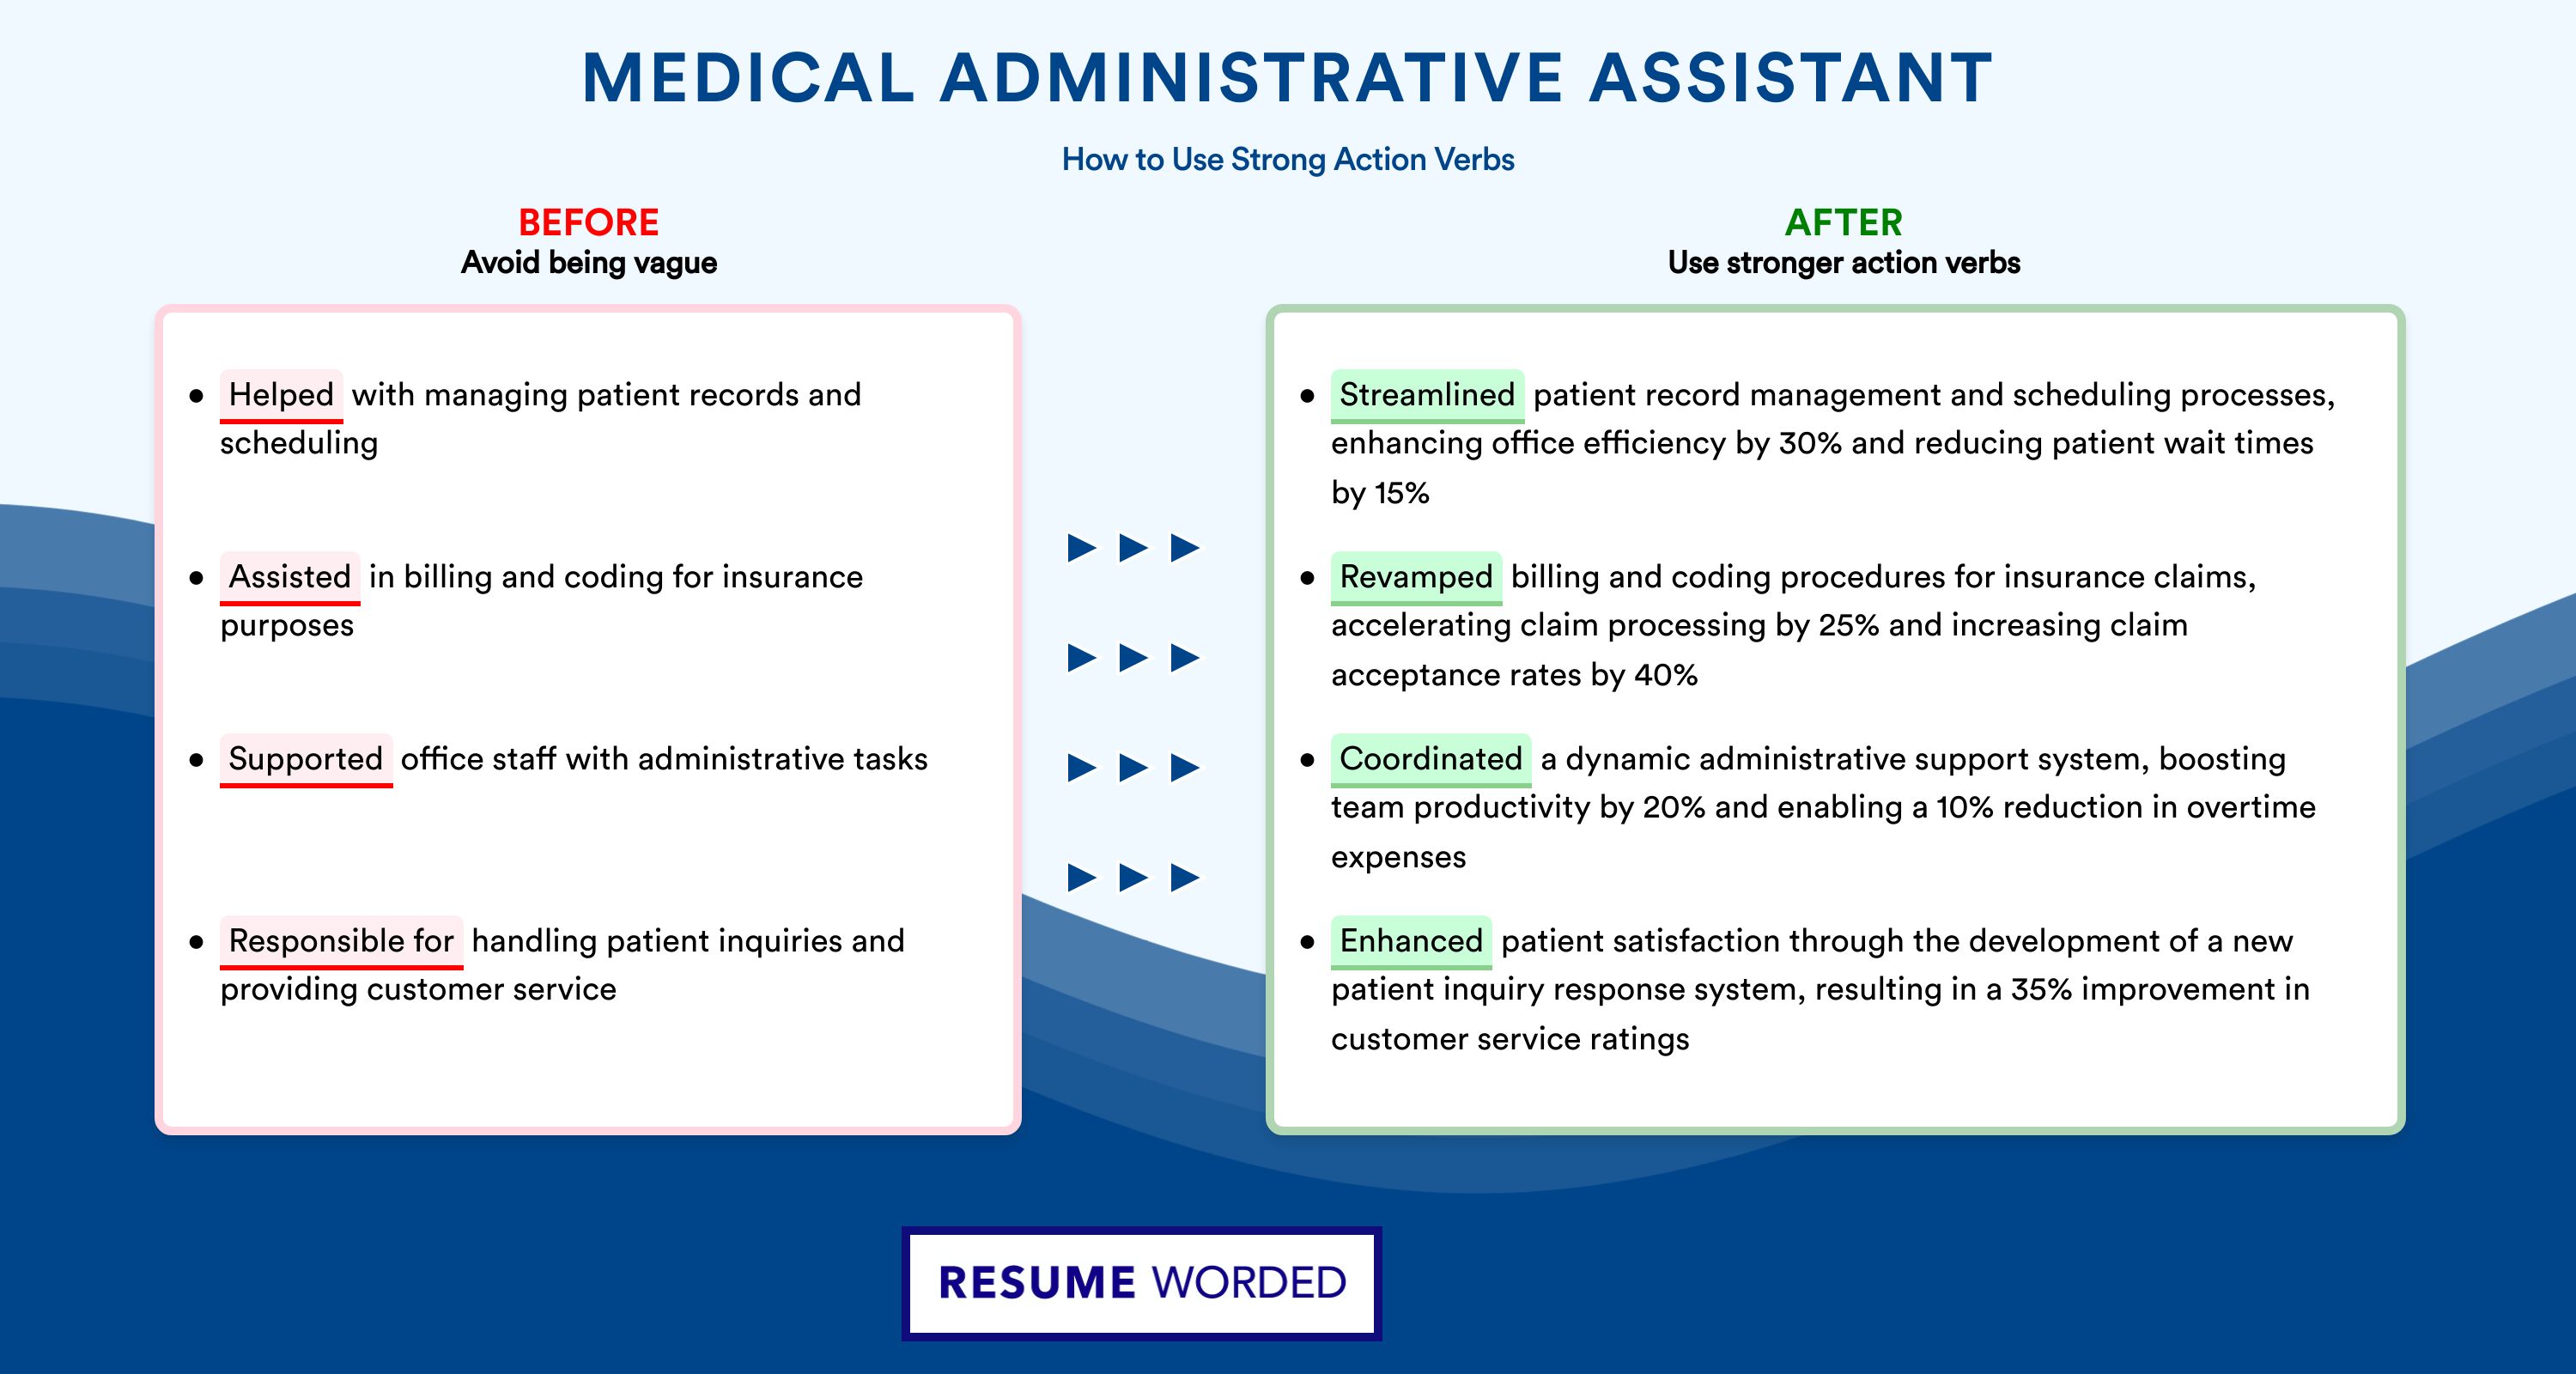 Action Verbs for Medical Administrative Assistant